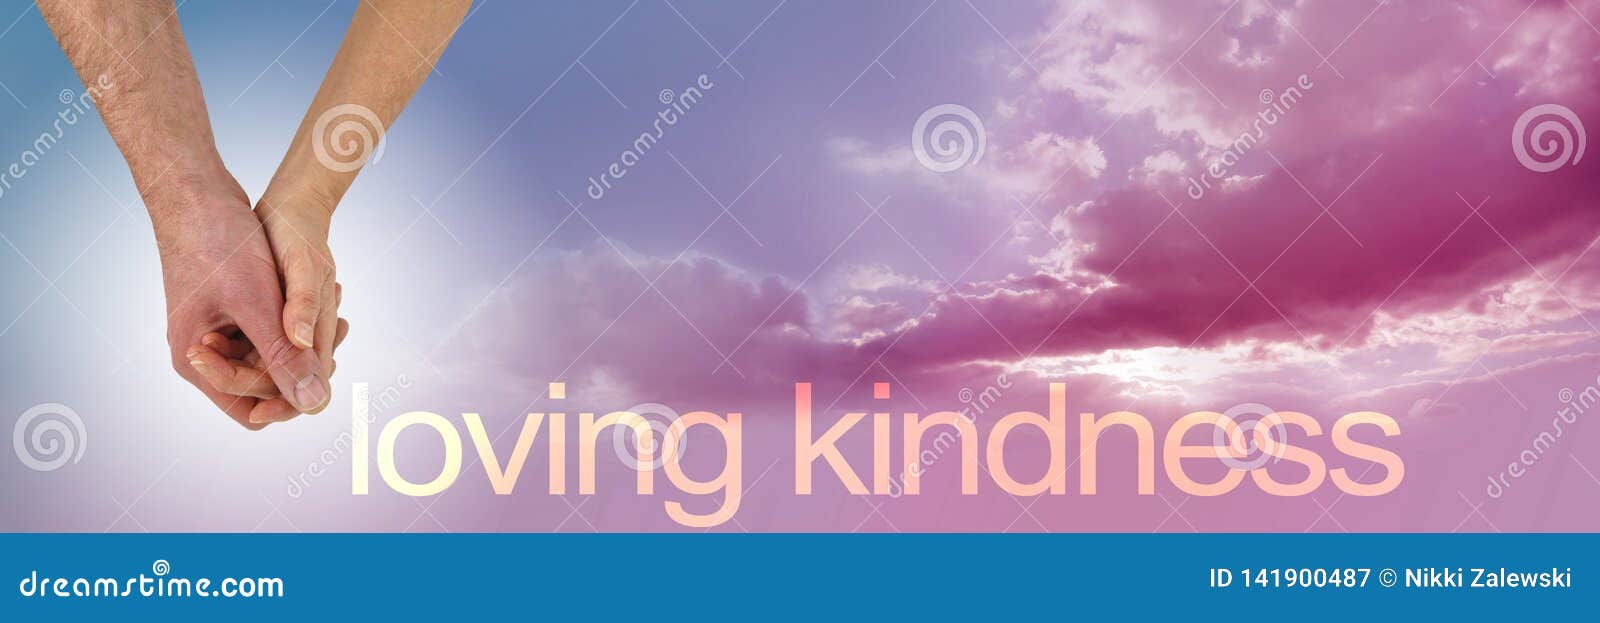 loving-kindness is a way of life